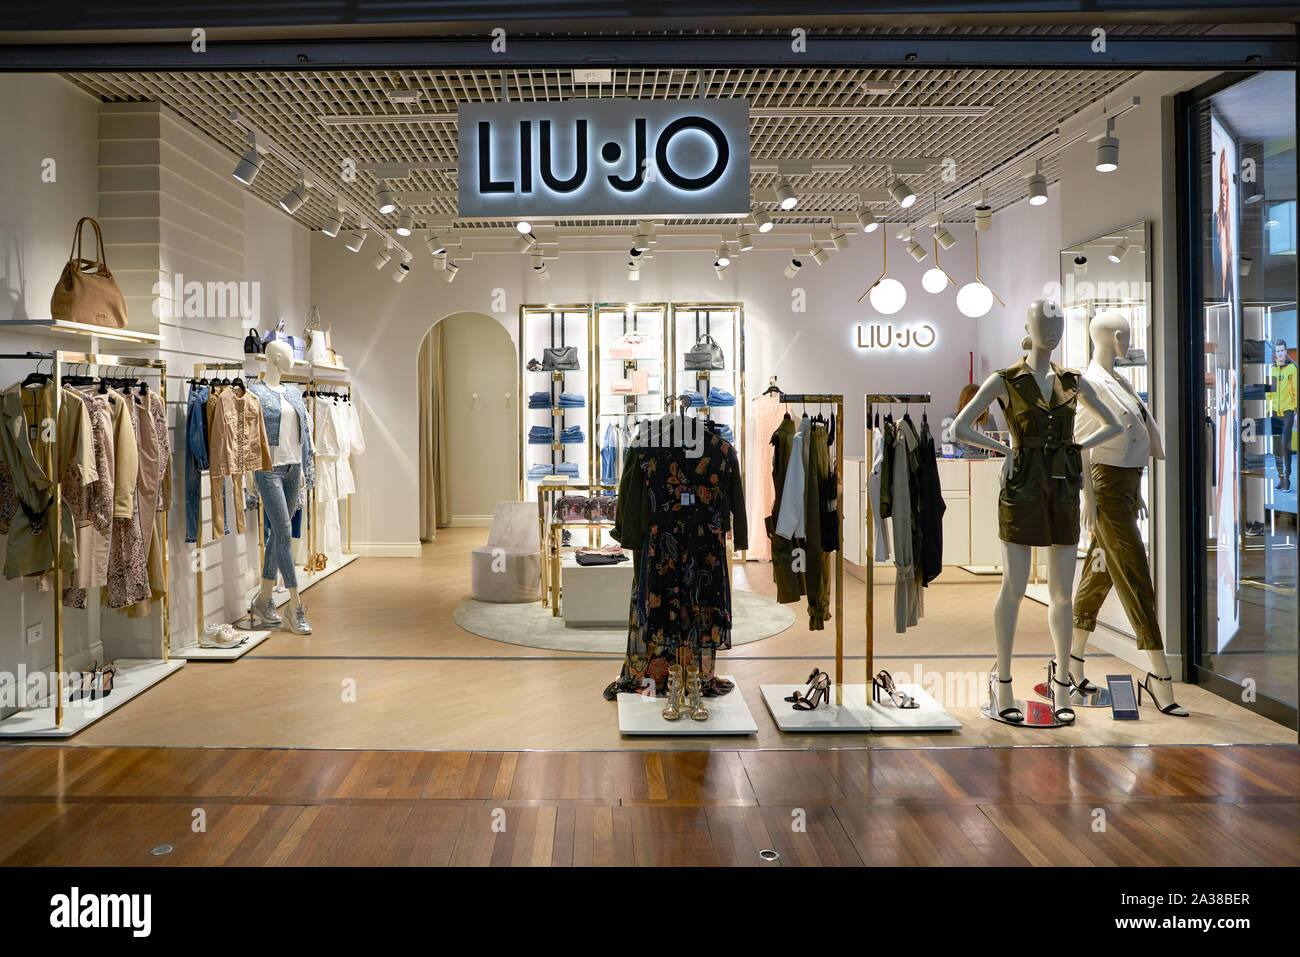 Liu Jo Store High Resolution Stock Photography and Images - Alamy